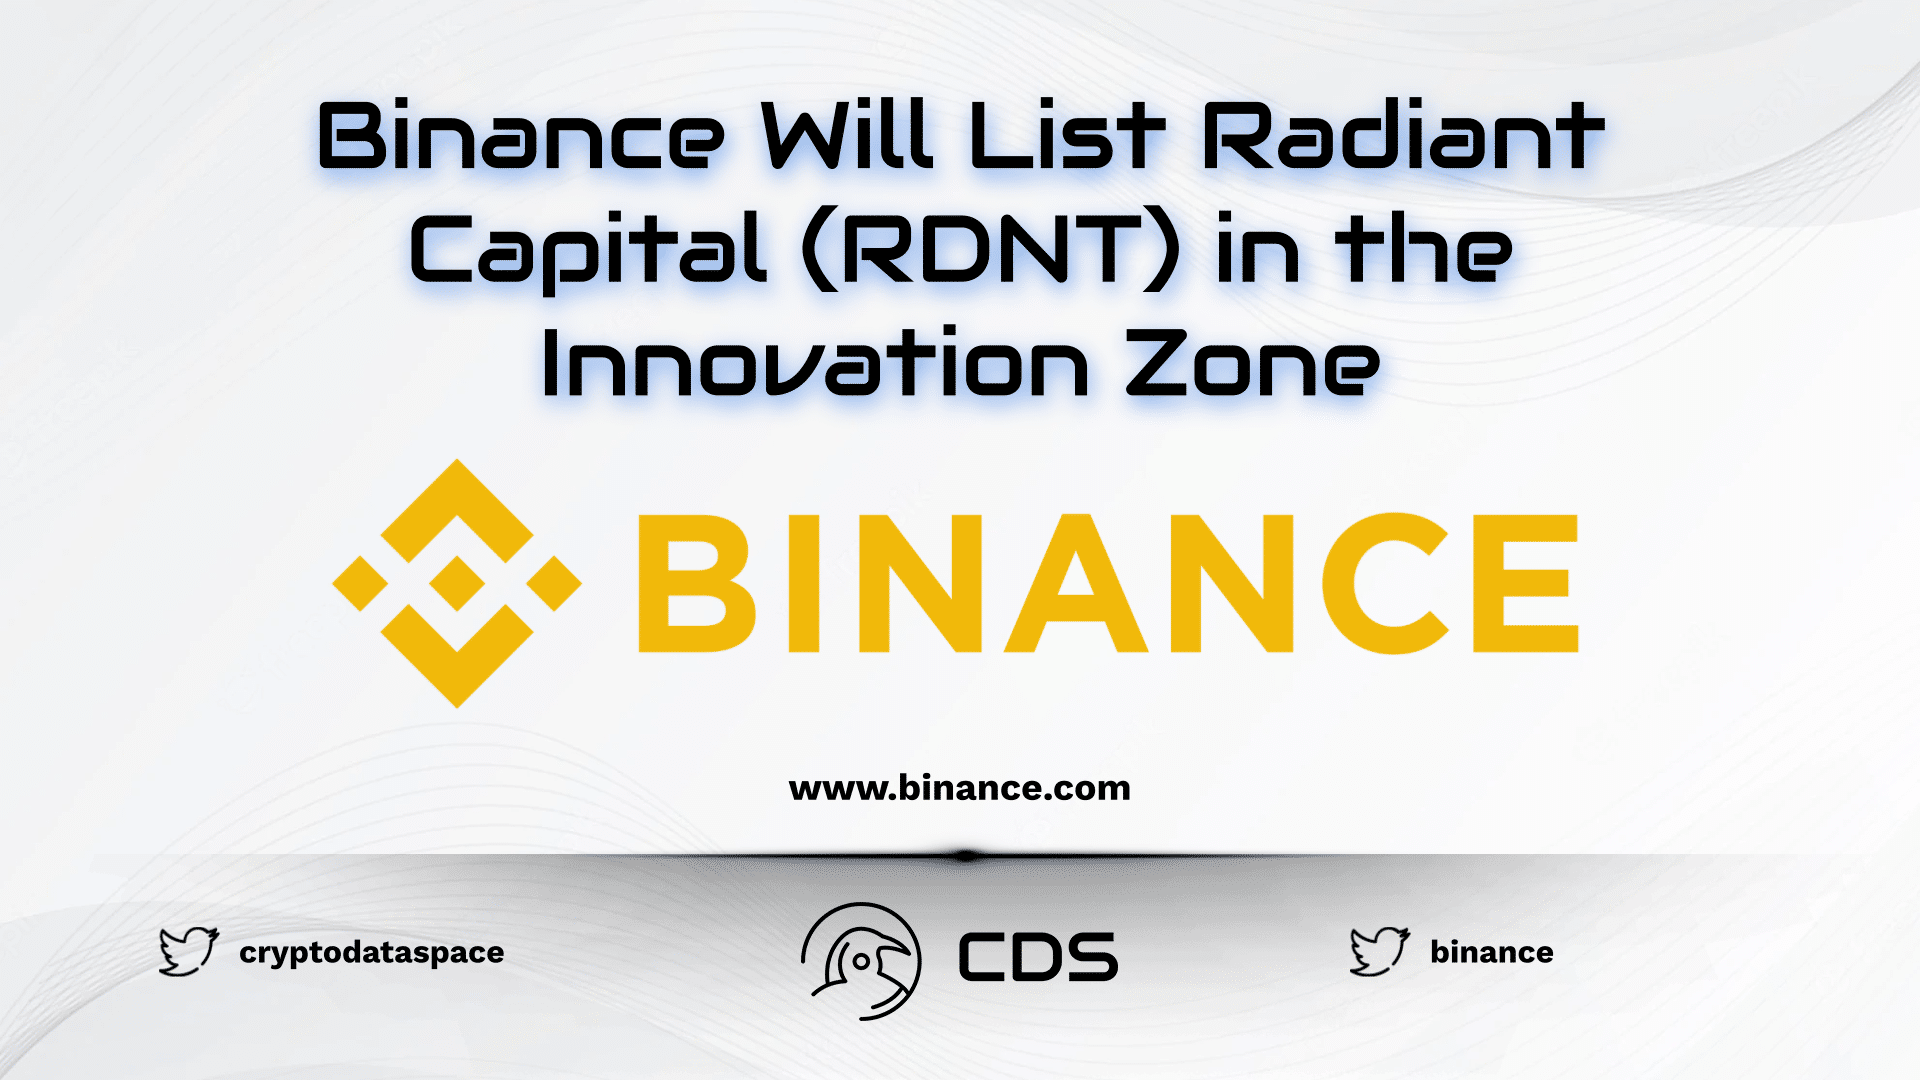 Binance Will List Radiant Capital (RDNT) in the Innovation Zone